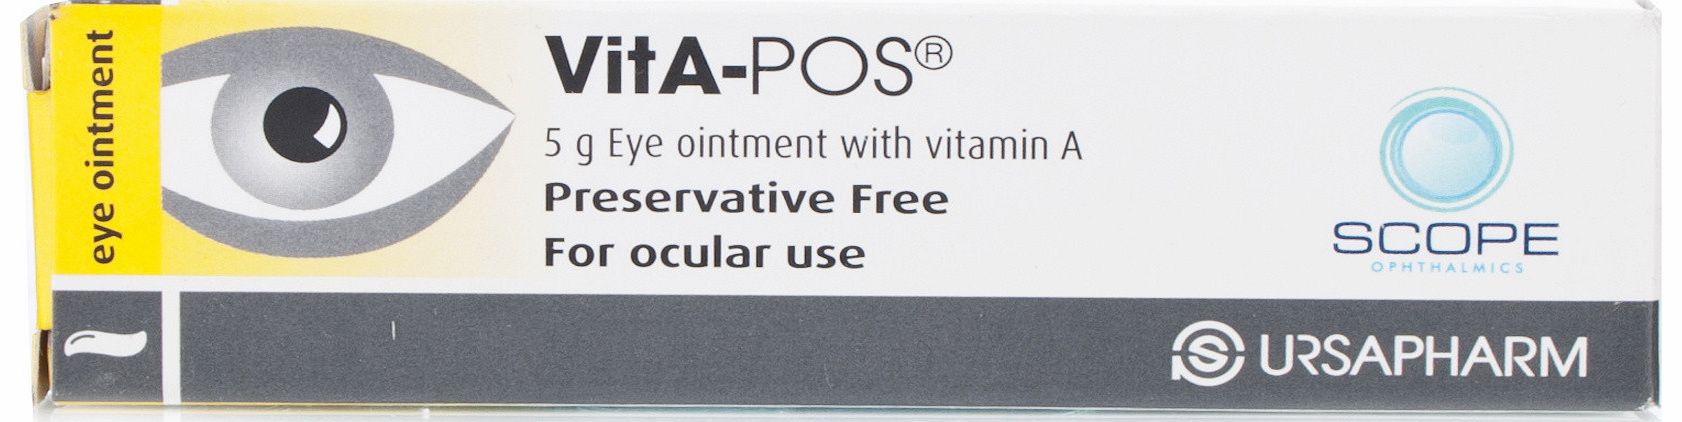 VitA-POS, is a light paraffin based ointment which also contains Vitamin A, which has been shown to improve symptoms of blurred vision and tear film stability in dry eyes. It has a much softer consistency than some of the older eye ointments, and as 